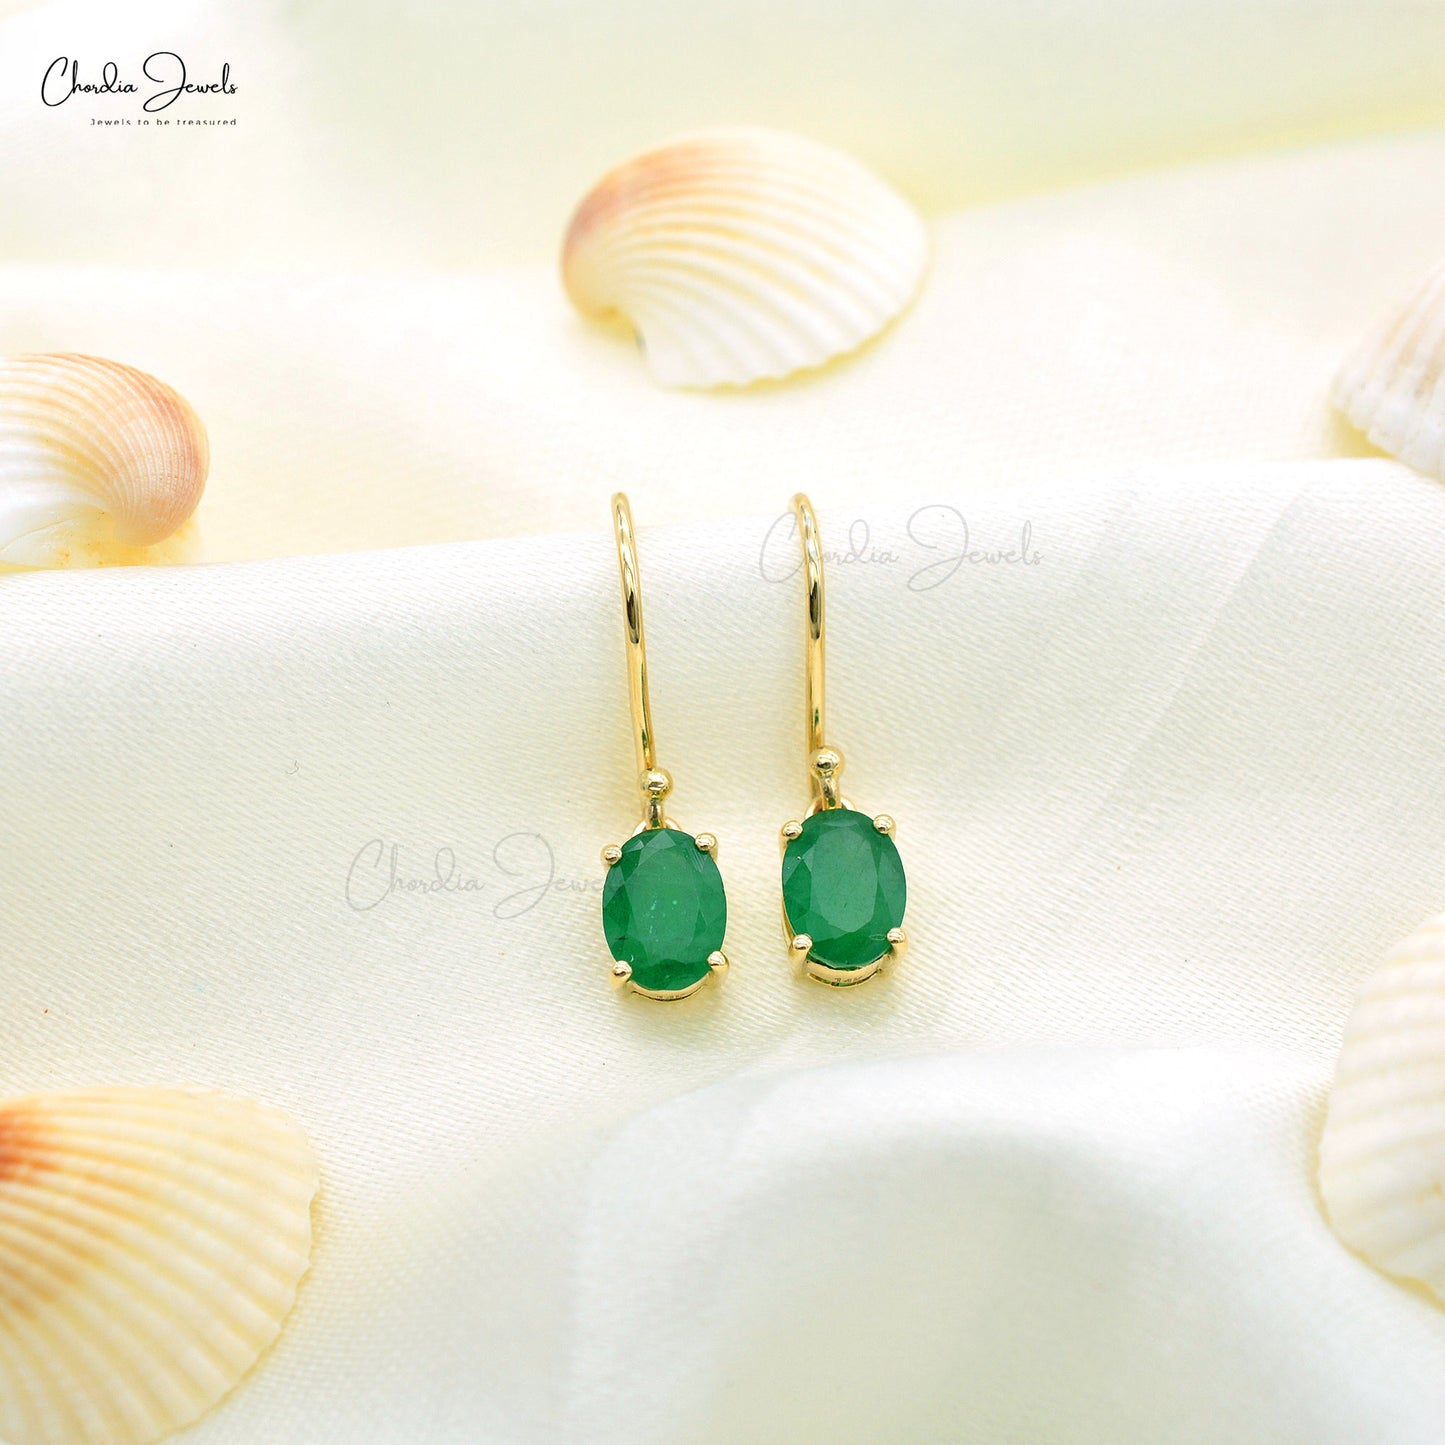 Adorn yourself in elegance with emerald dangle earrings.